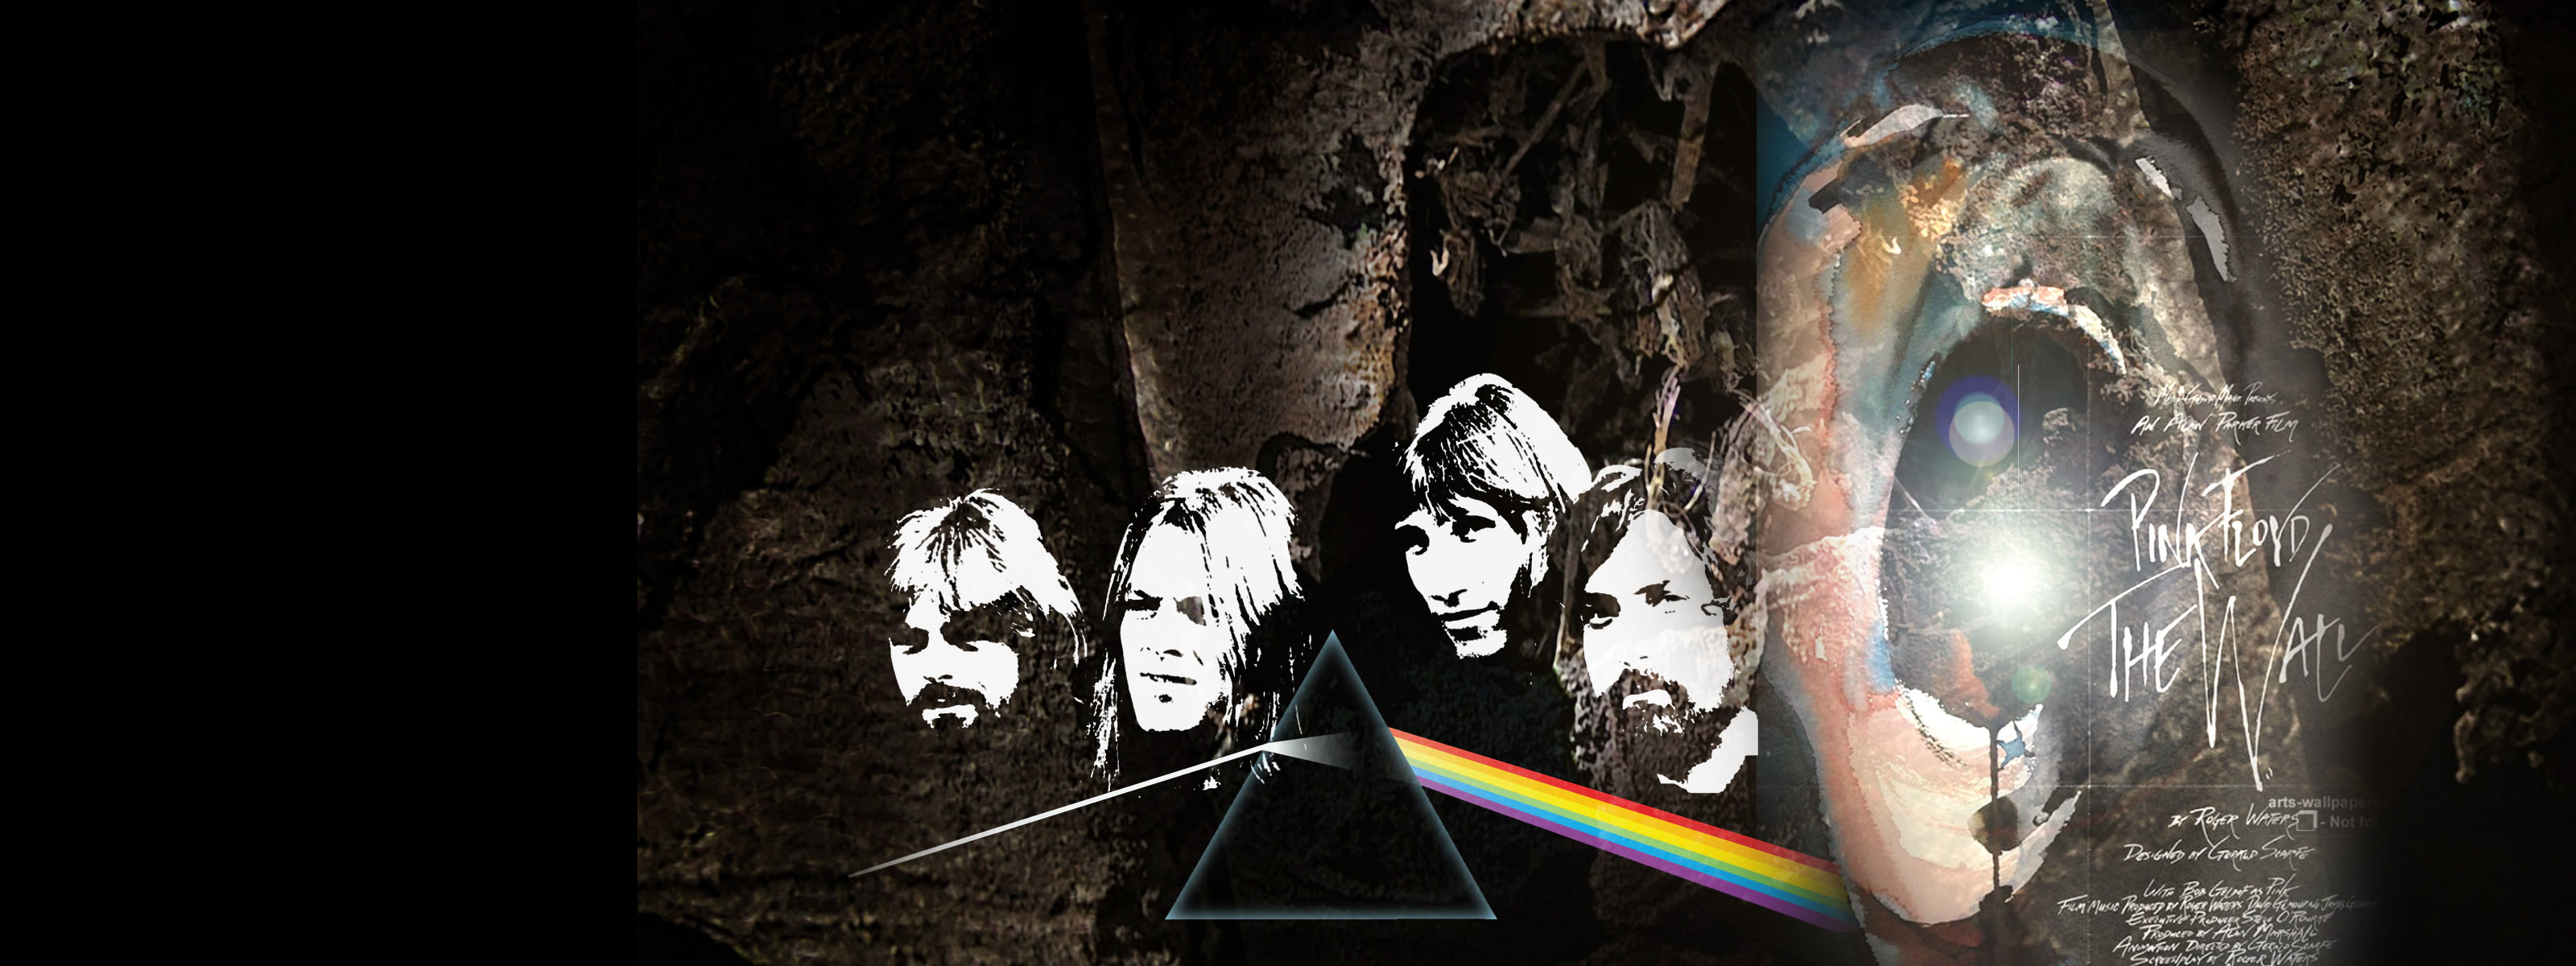 3200x1200 ... hd wallpapers scream against the wall under pink floyd ...